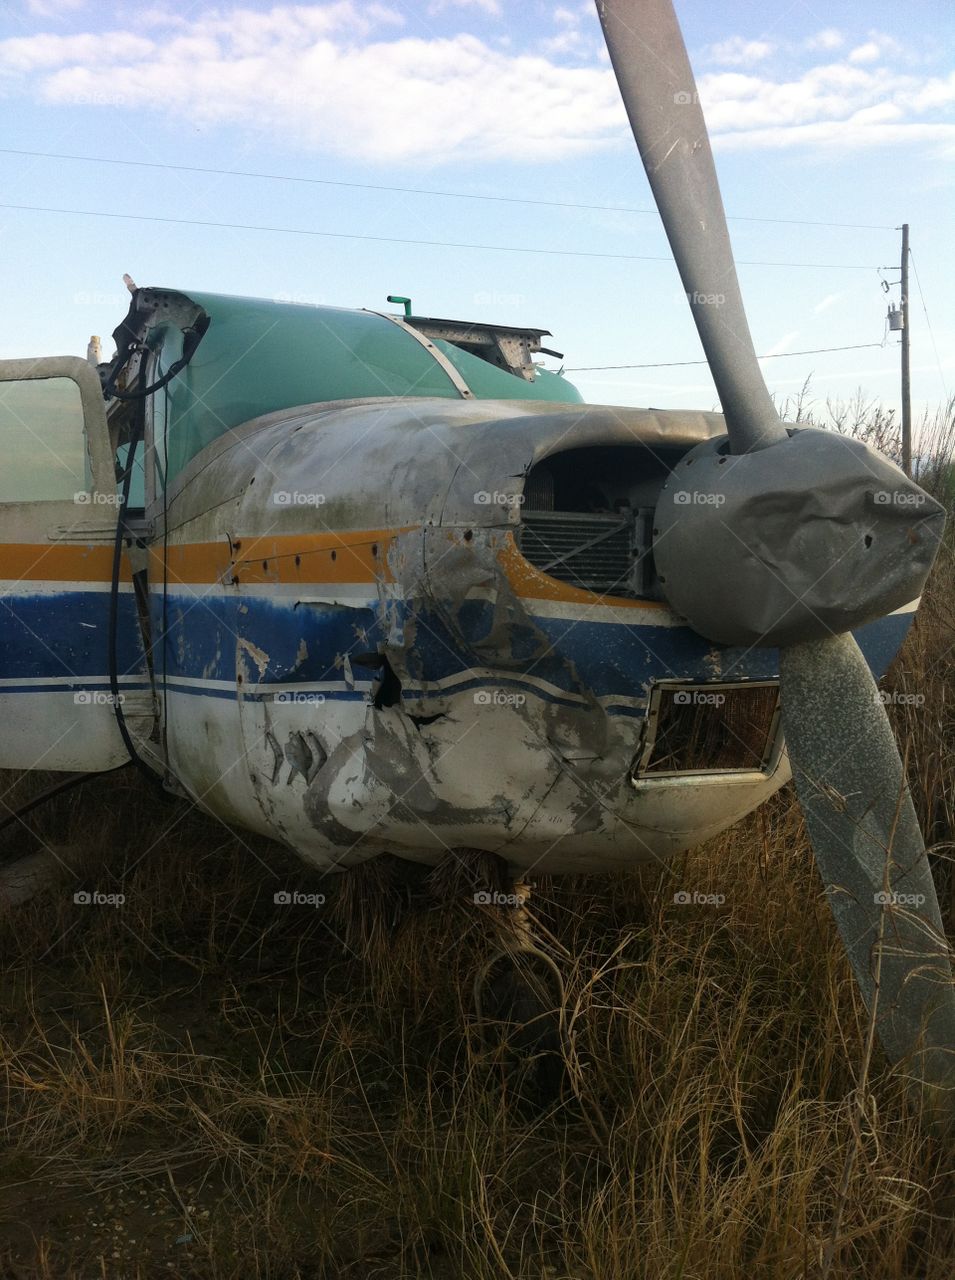 A rugged old airplane. Gold and blue stripes, a real beauty in its day. With dented propeller and cracked windshield, it now sits in a field, remembering its glory days